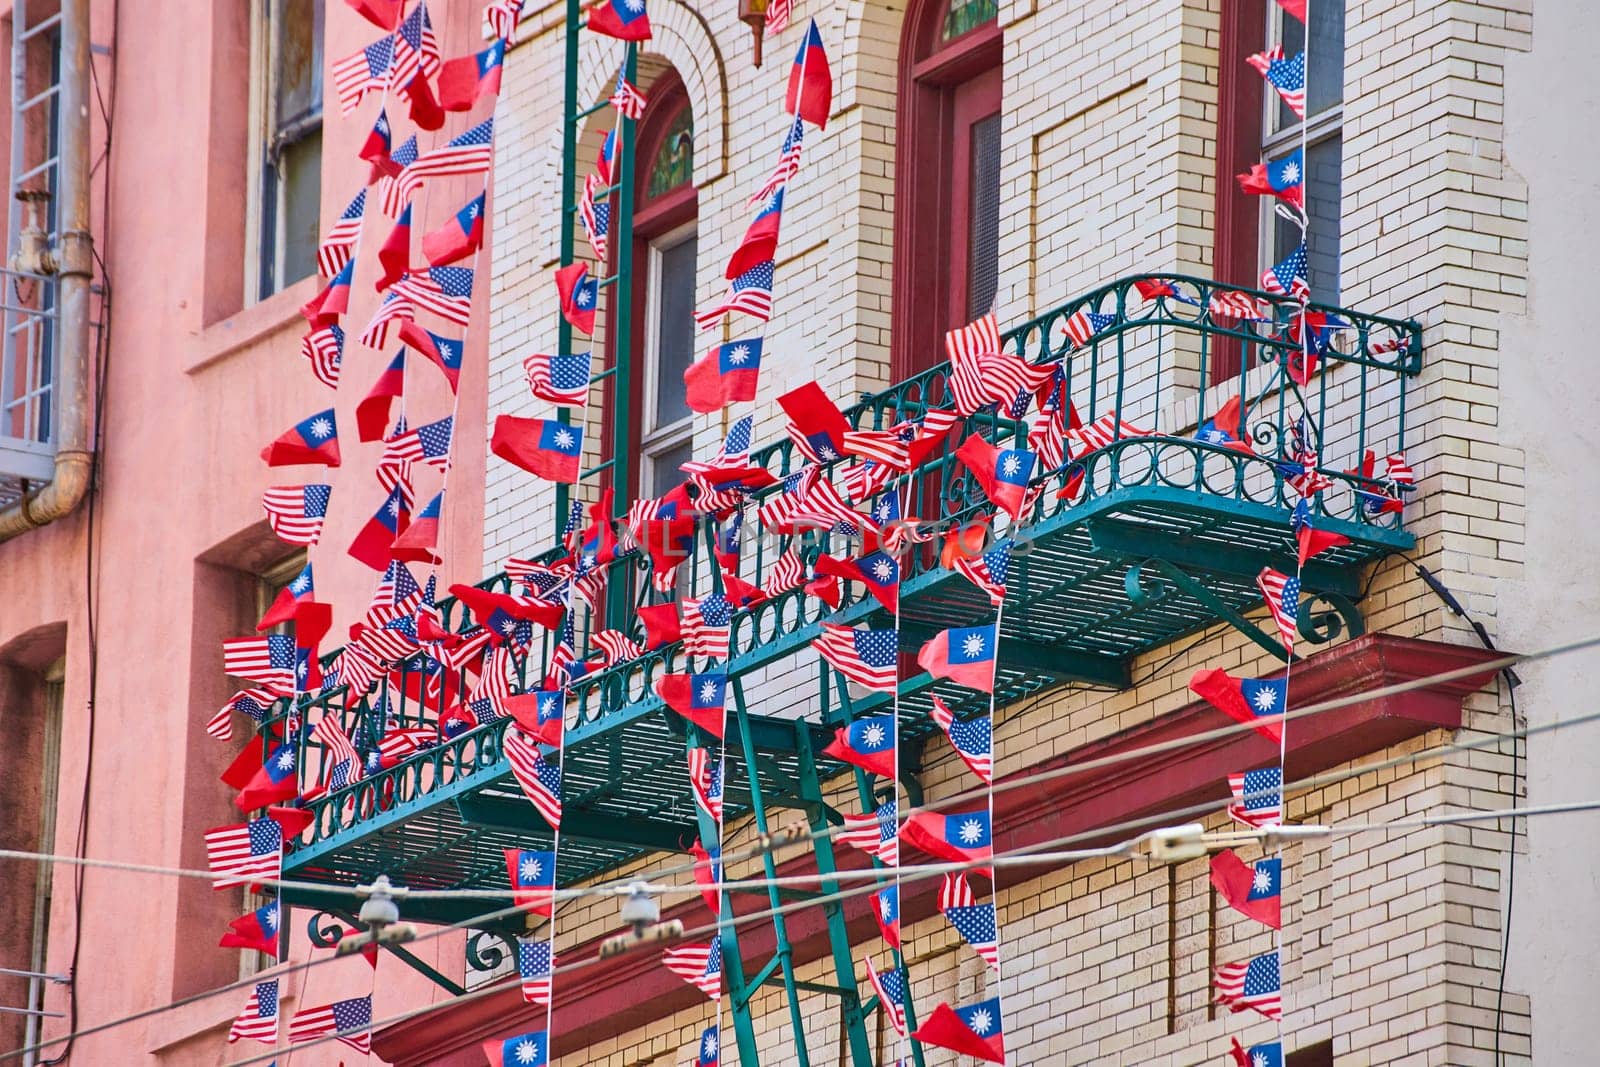 Image of Chinese and American flags in long ribbons attached to white building with green fire escape